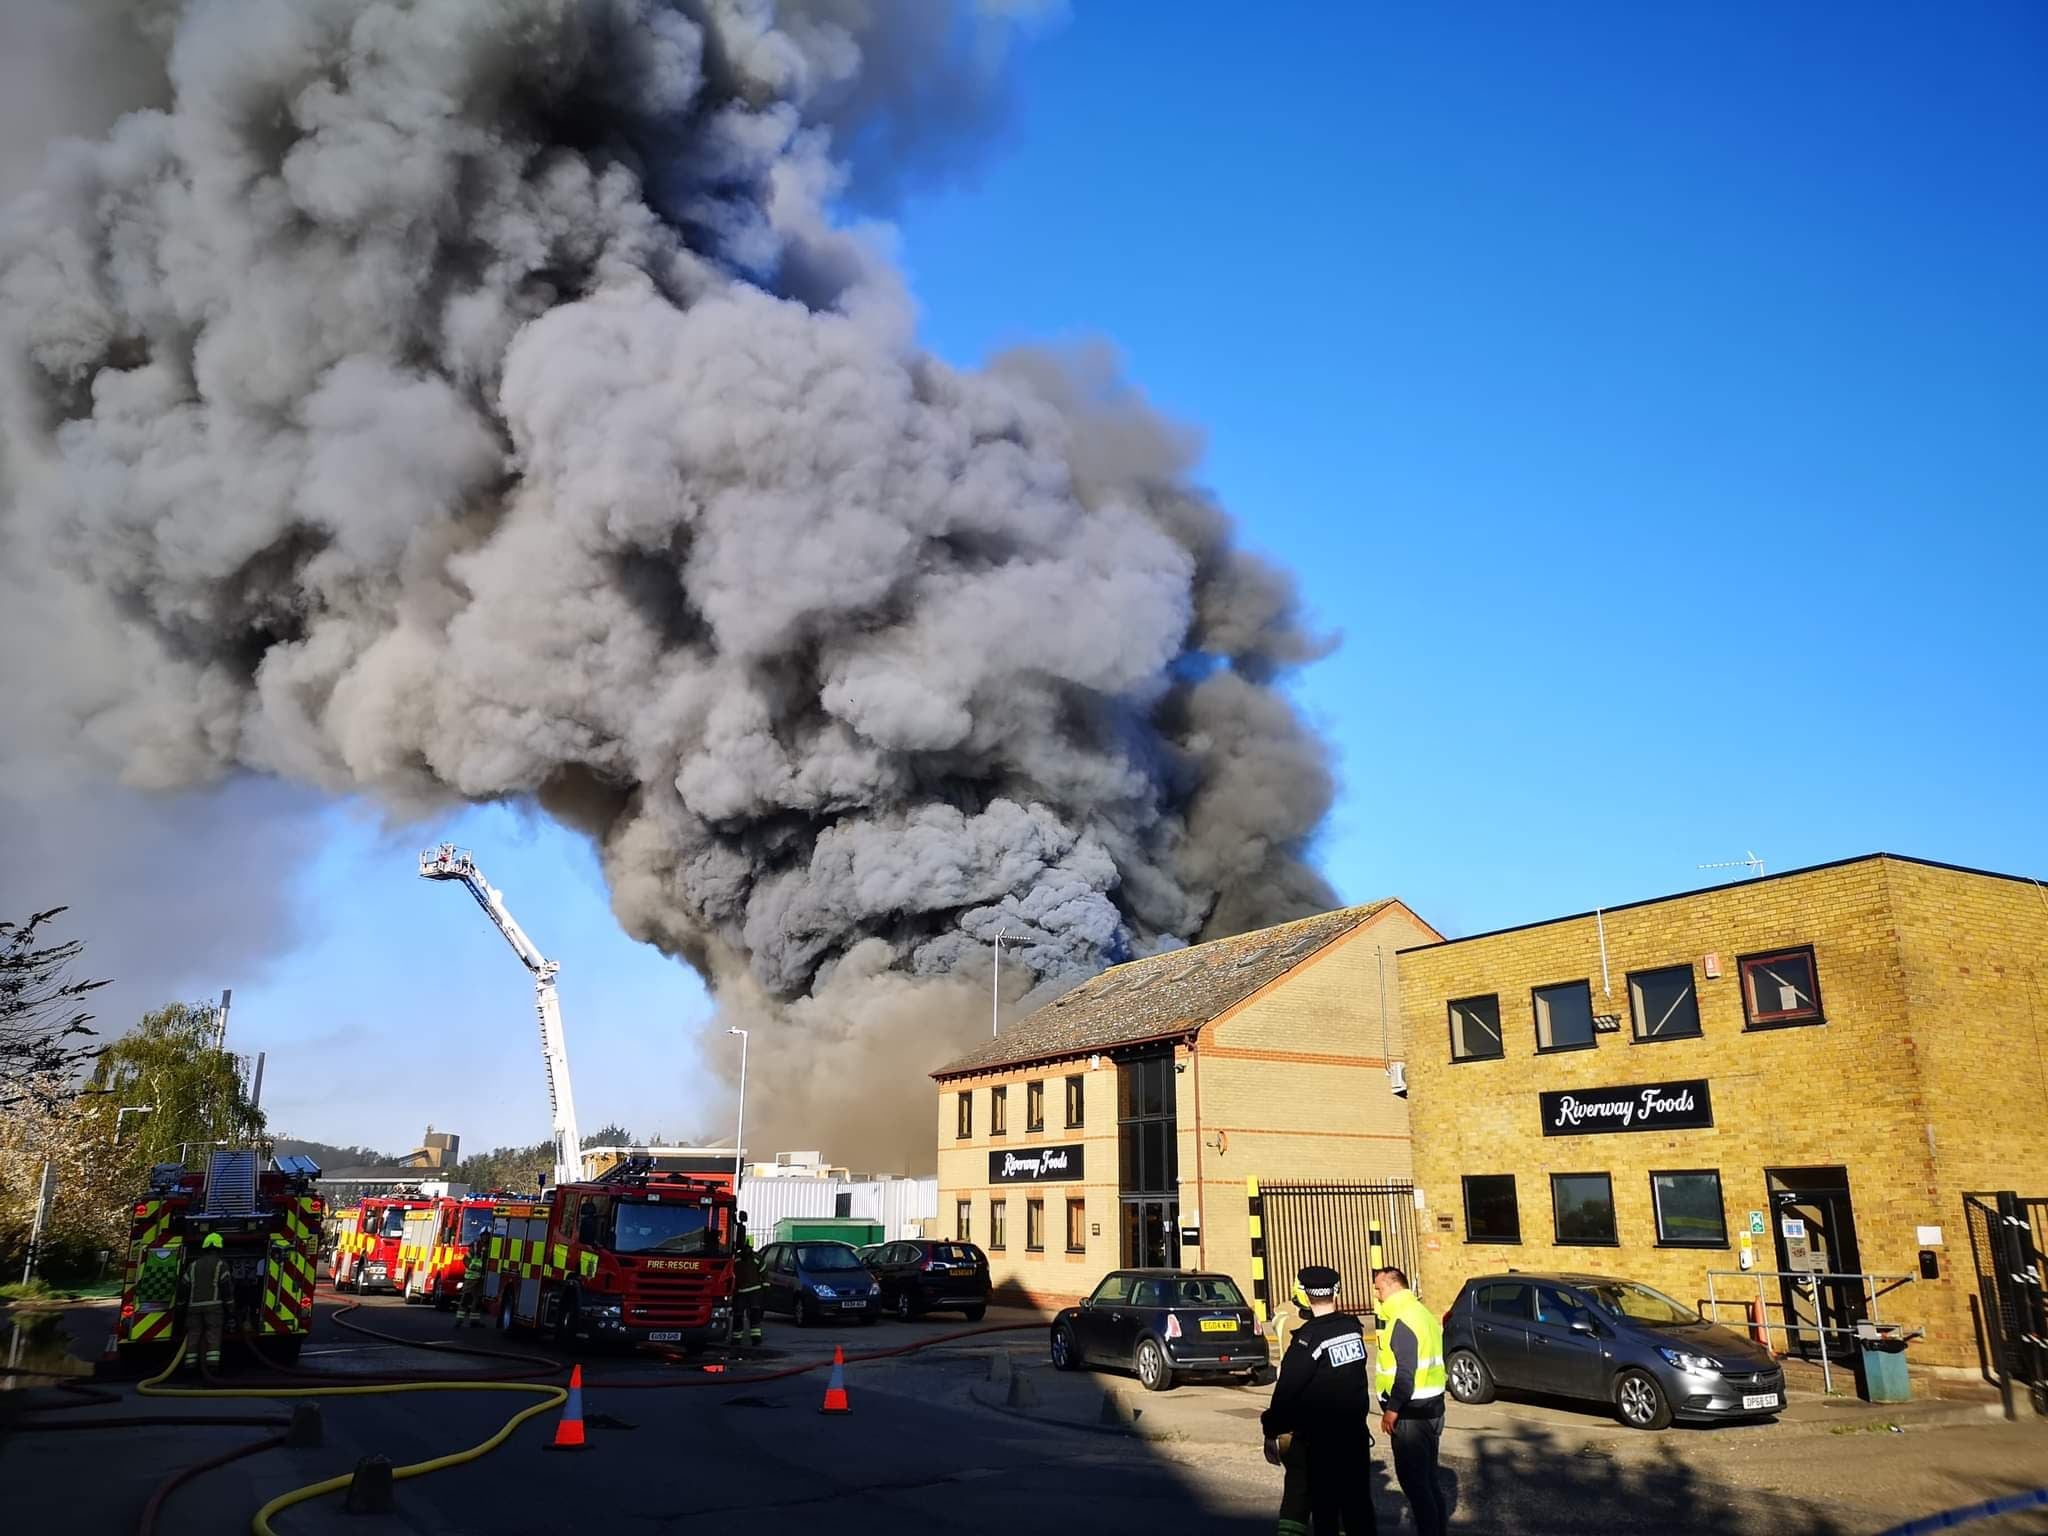 The fire in Harlow, Essex